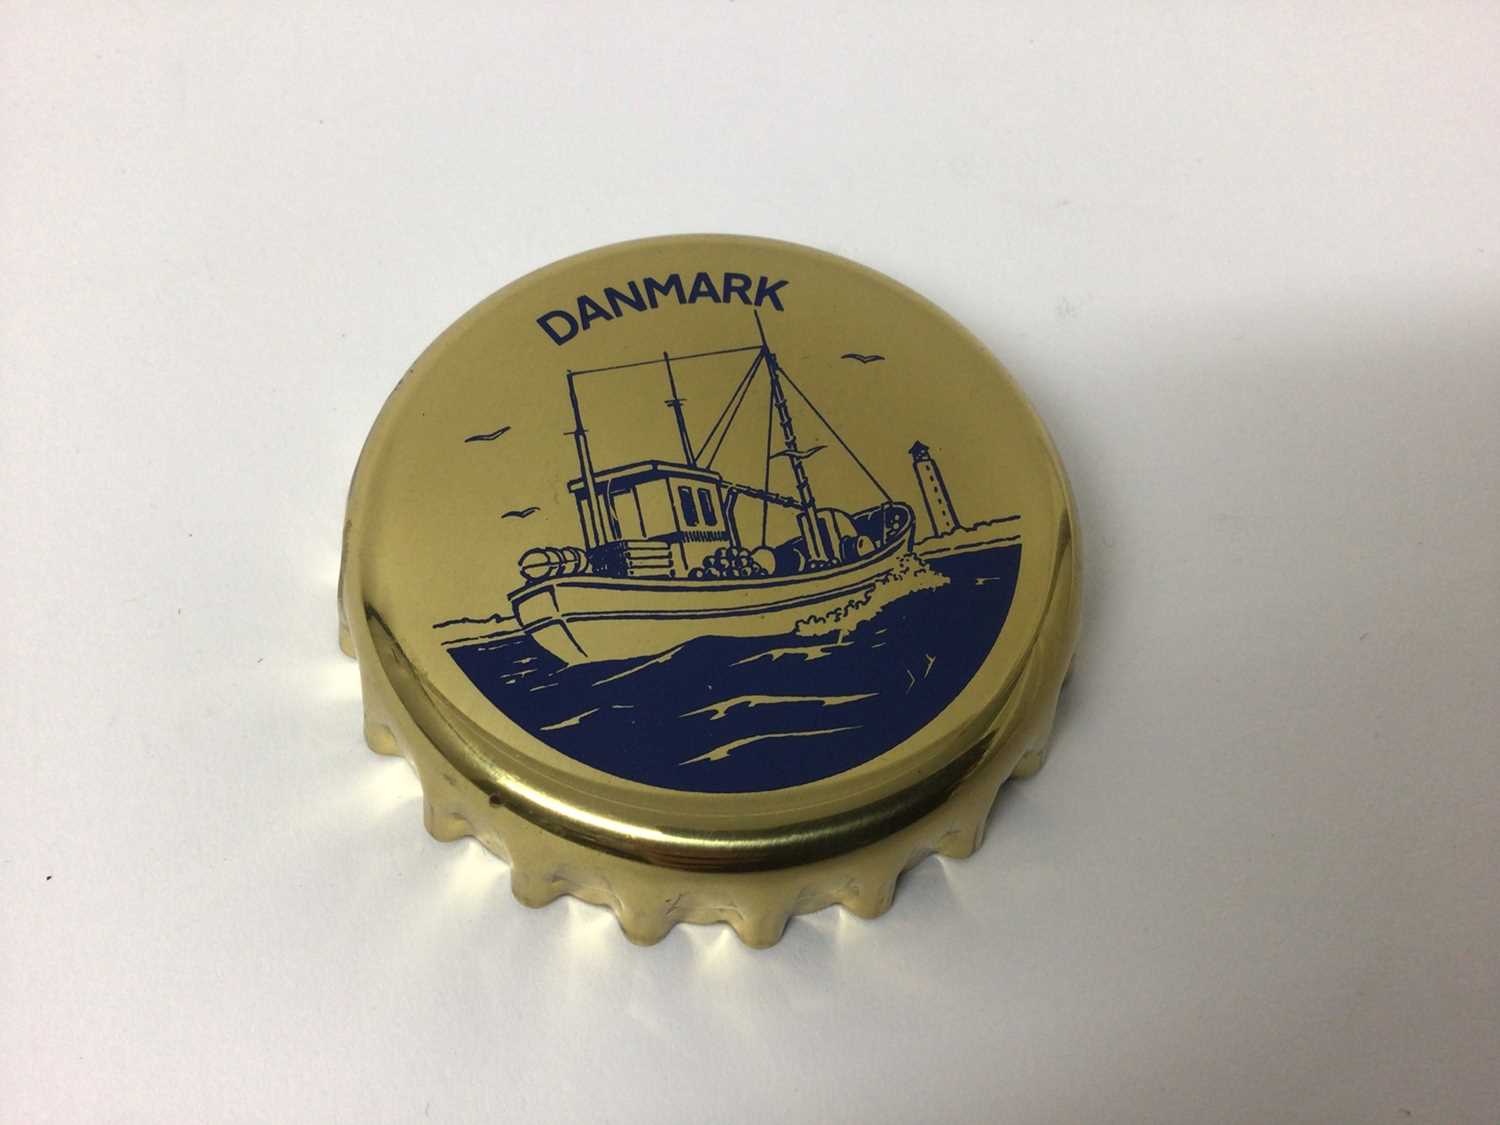 Lot 108 - Georg Jensen novelty bottle opener in the form of an oversized bottle cap, decorated with a boat